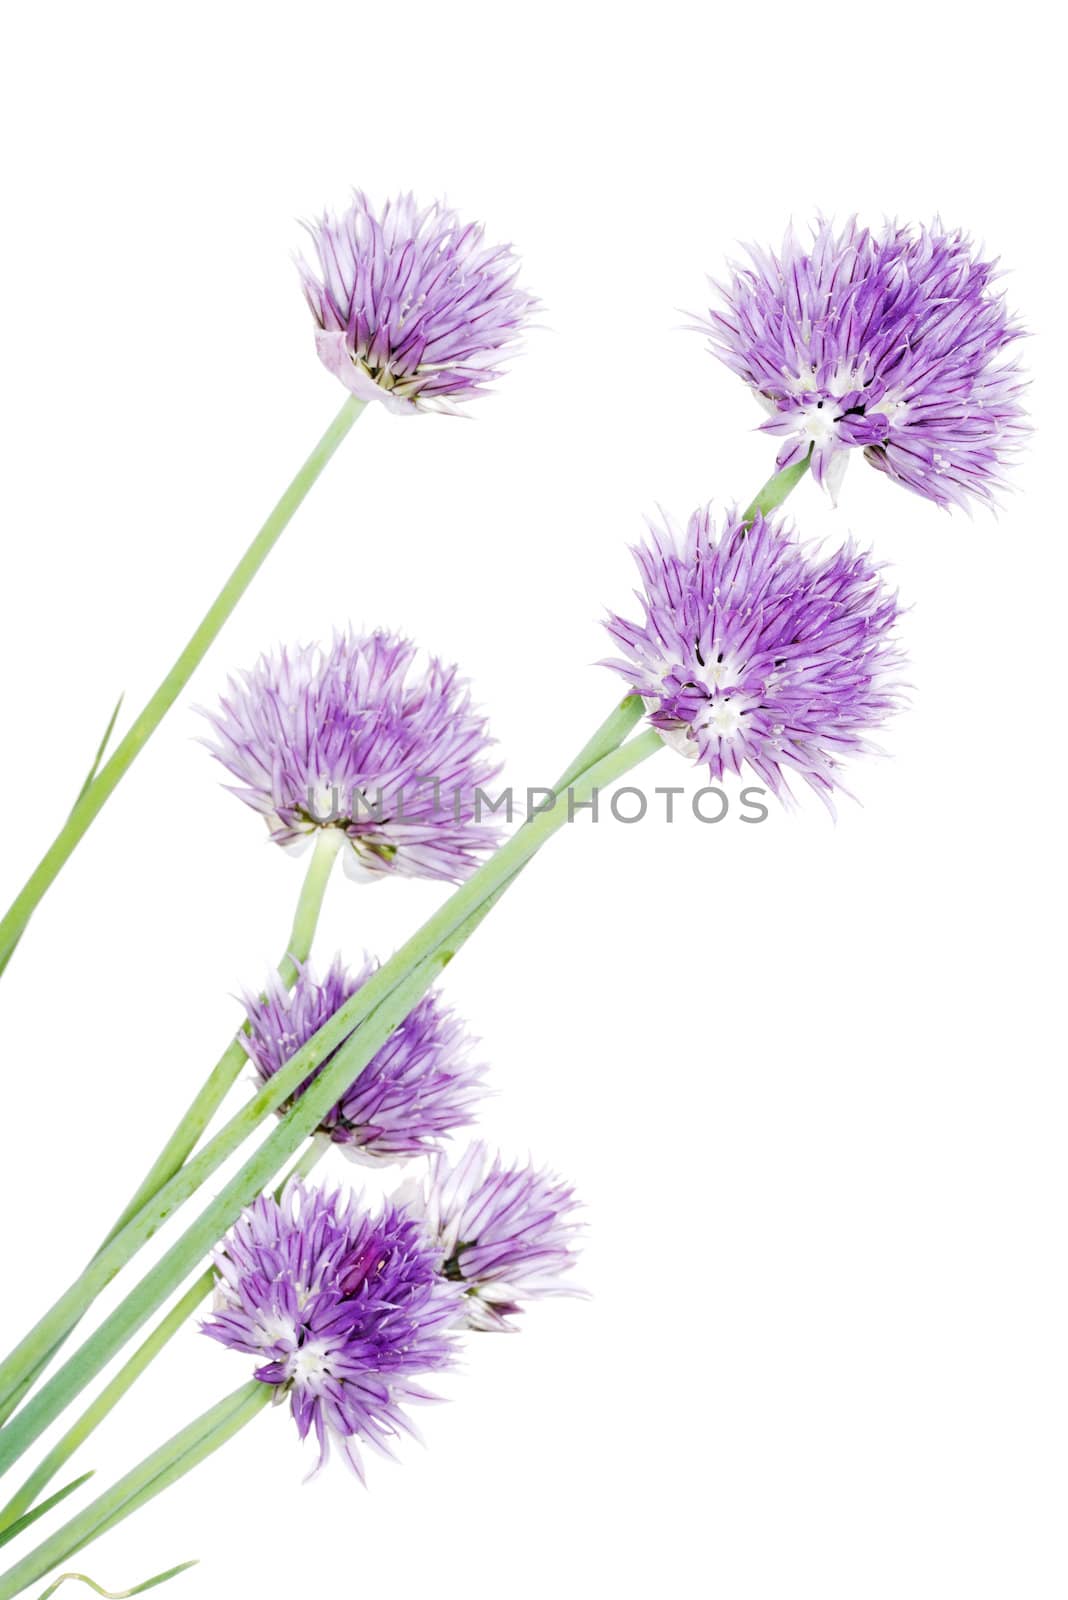 Chives decorative flowers close up